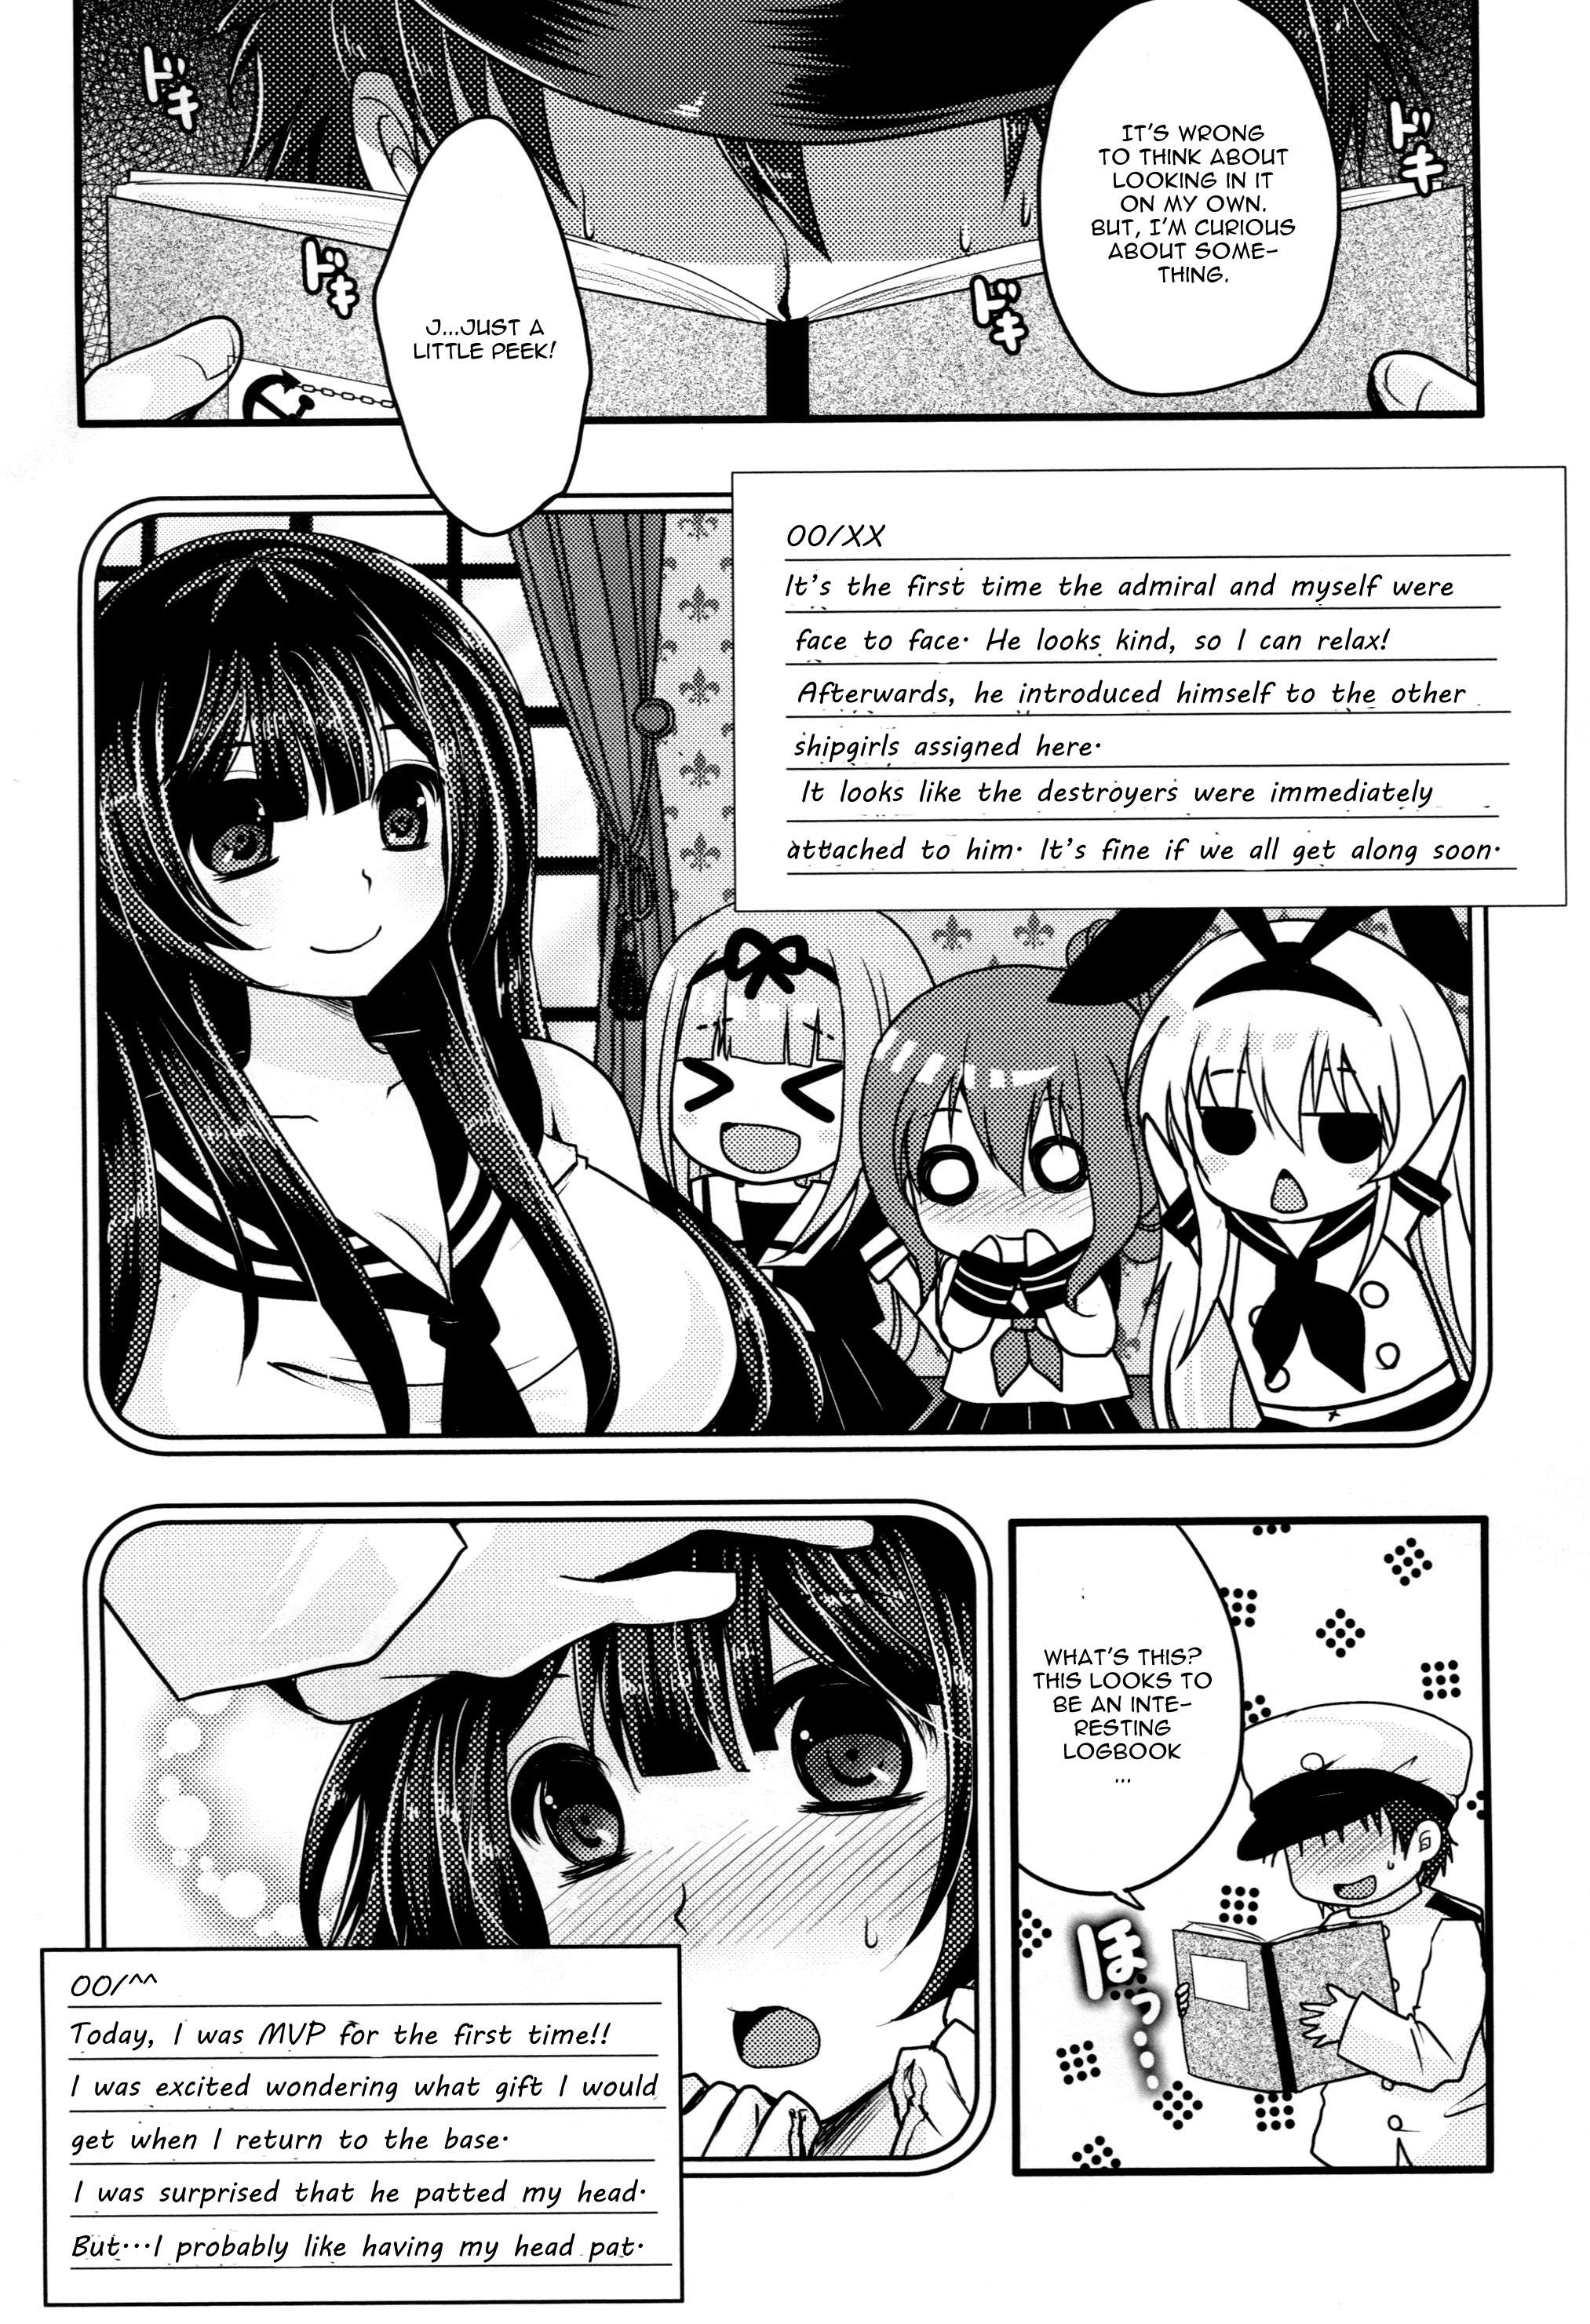 Oriental Moushuu Method - Kantai collection Storyline - Page 3